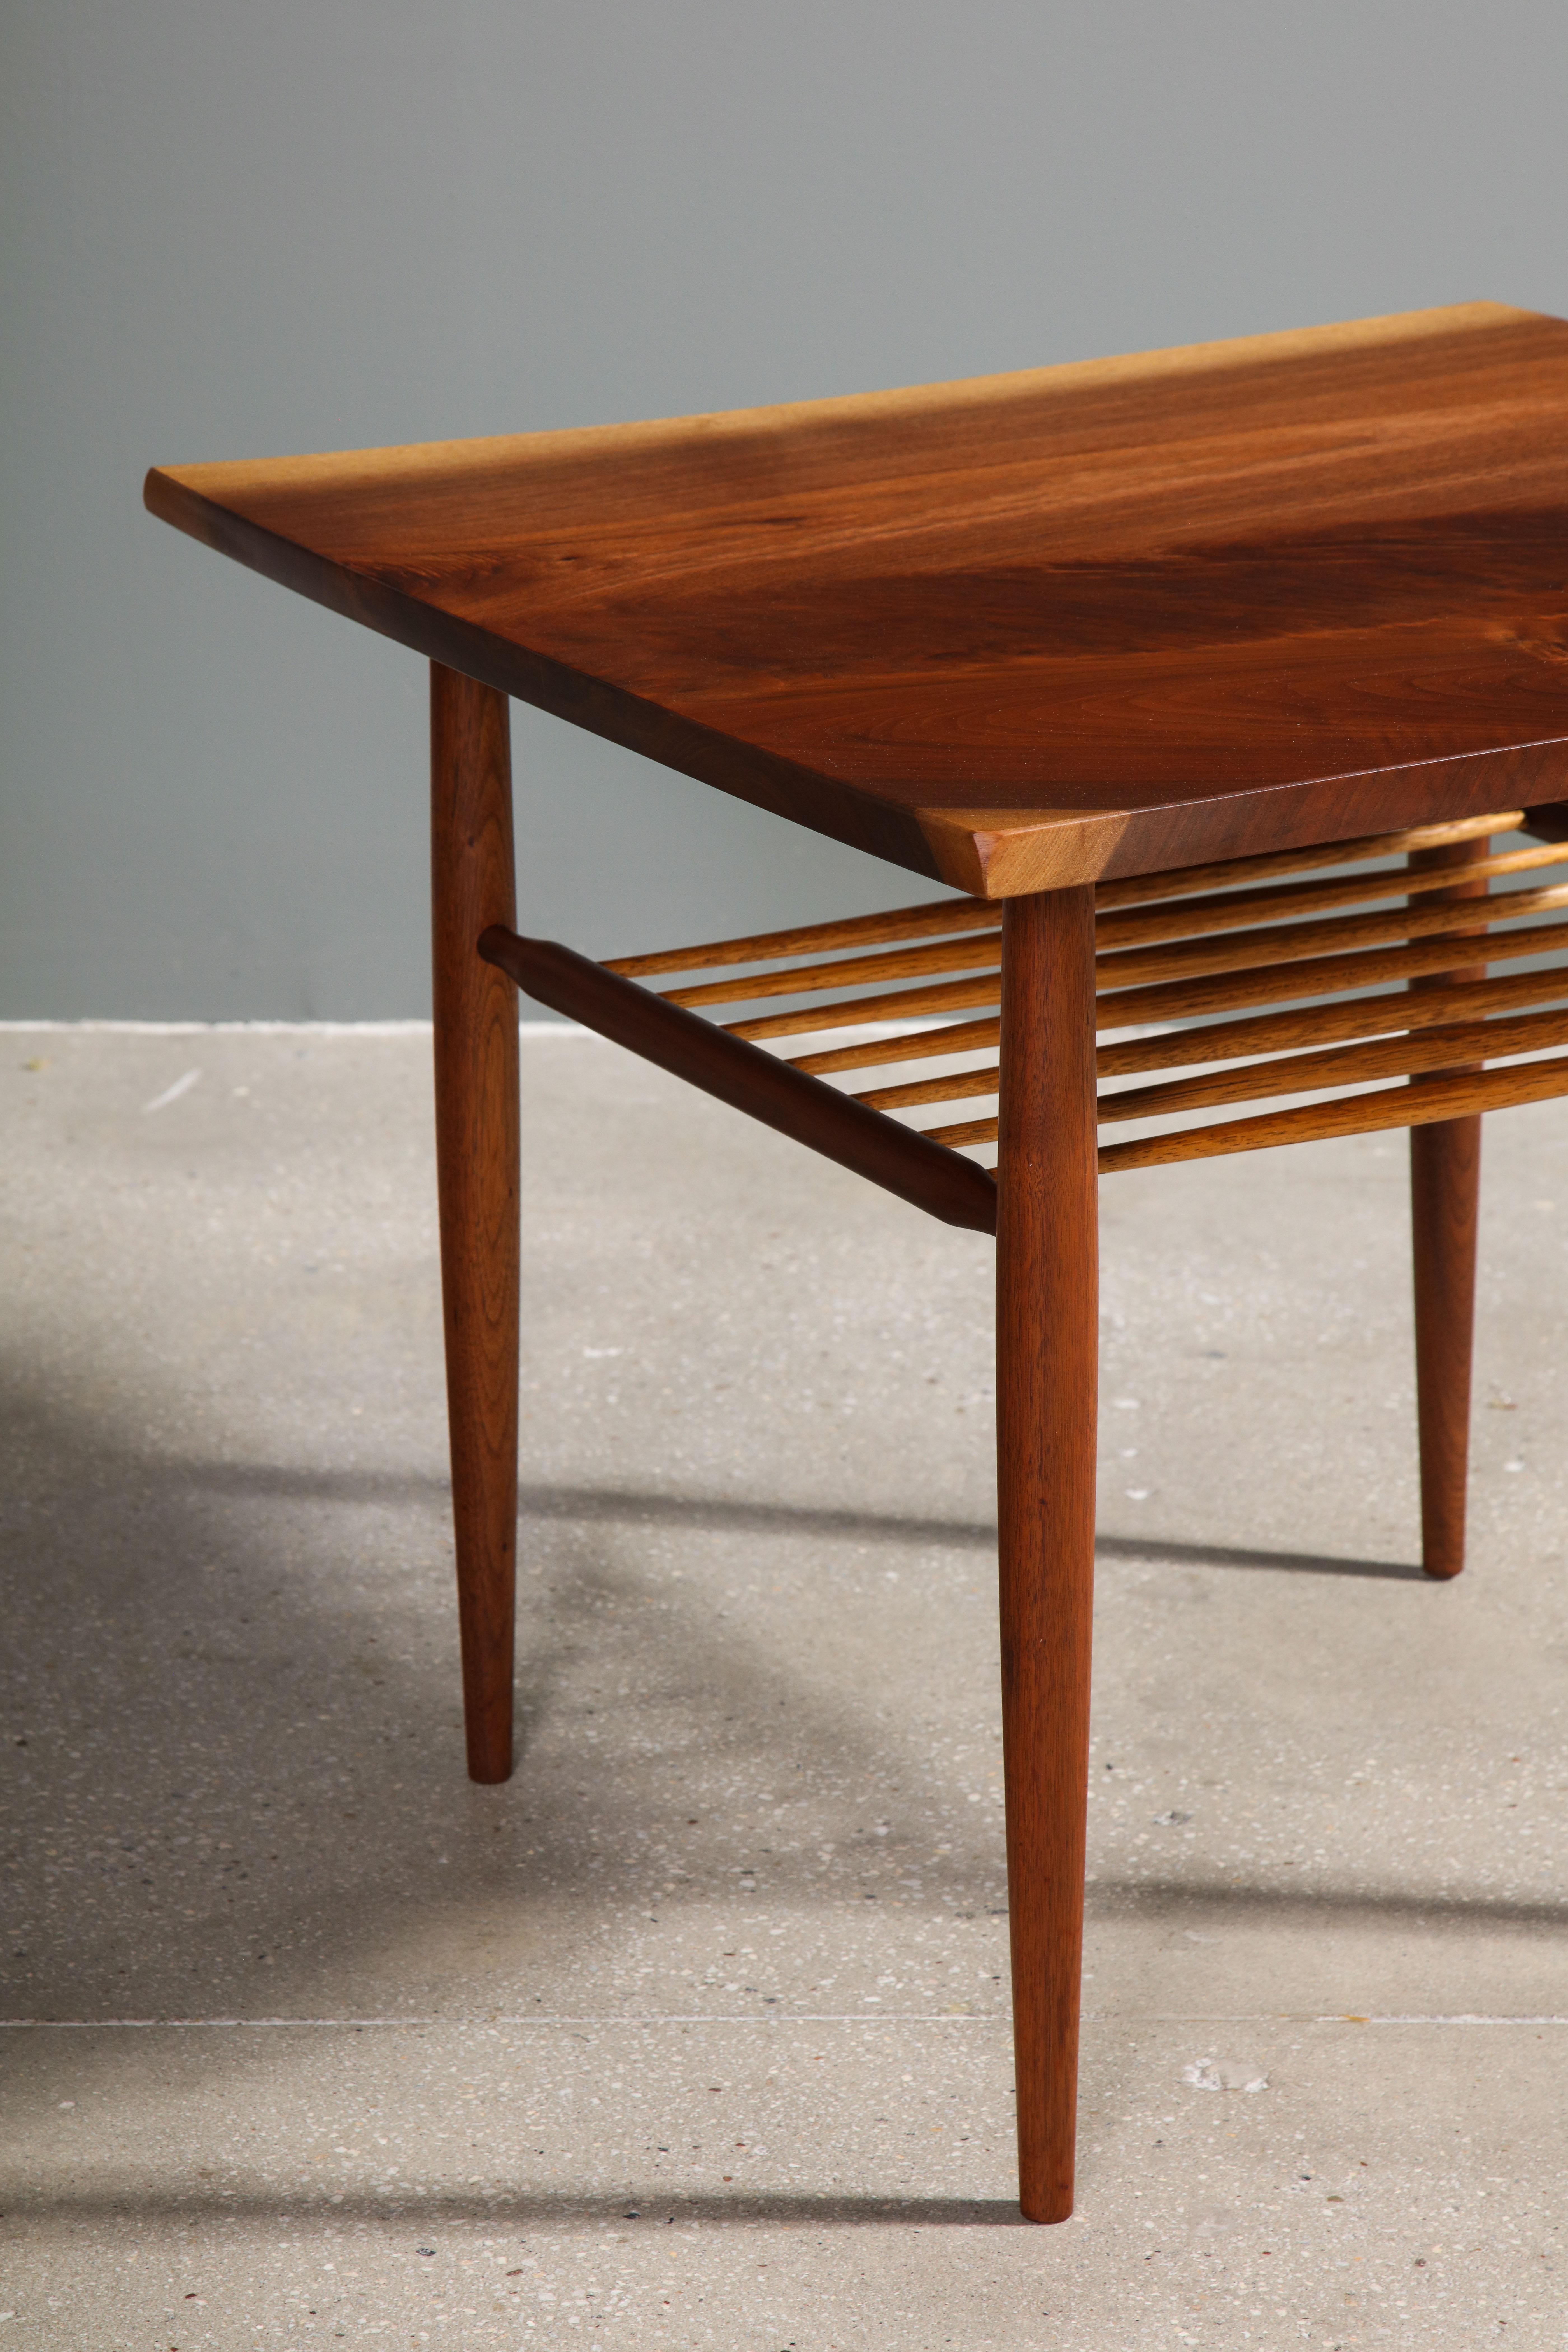 American Craftsman Walnut End Table with a Spindle Shelf, by George Nakashima